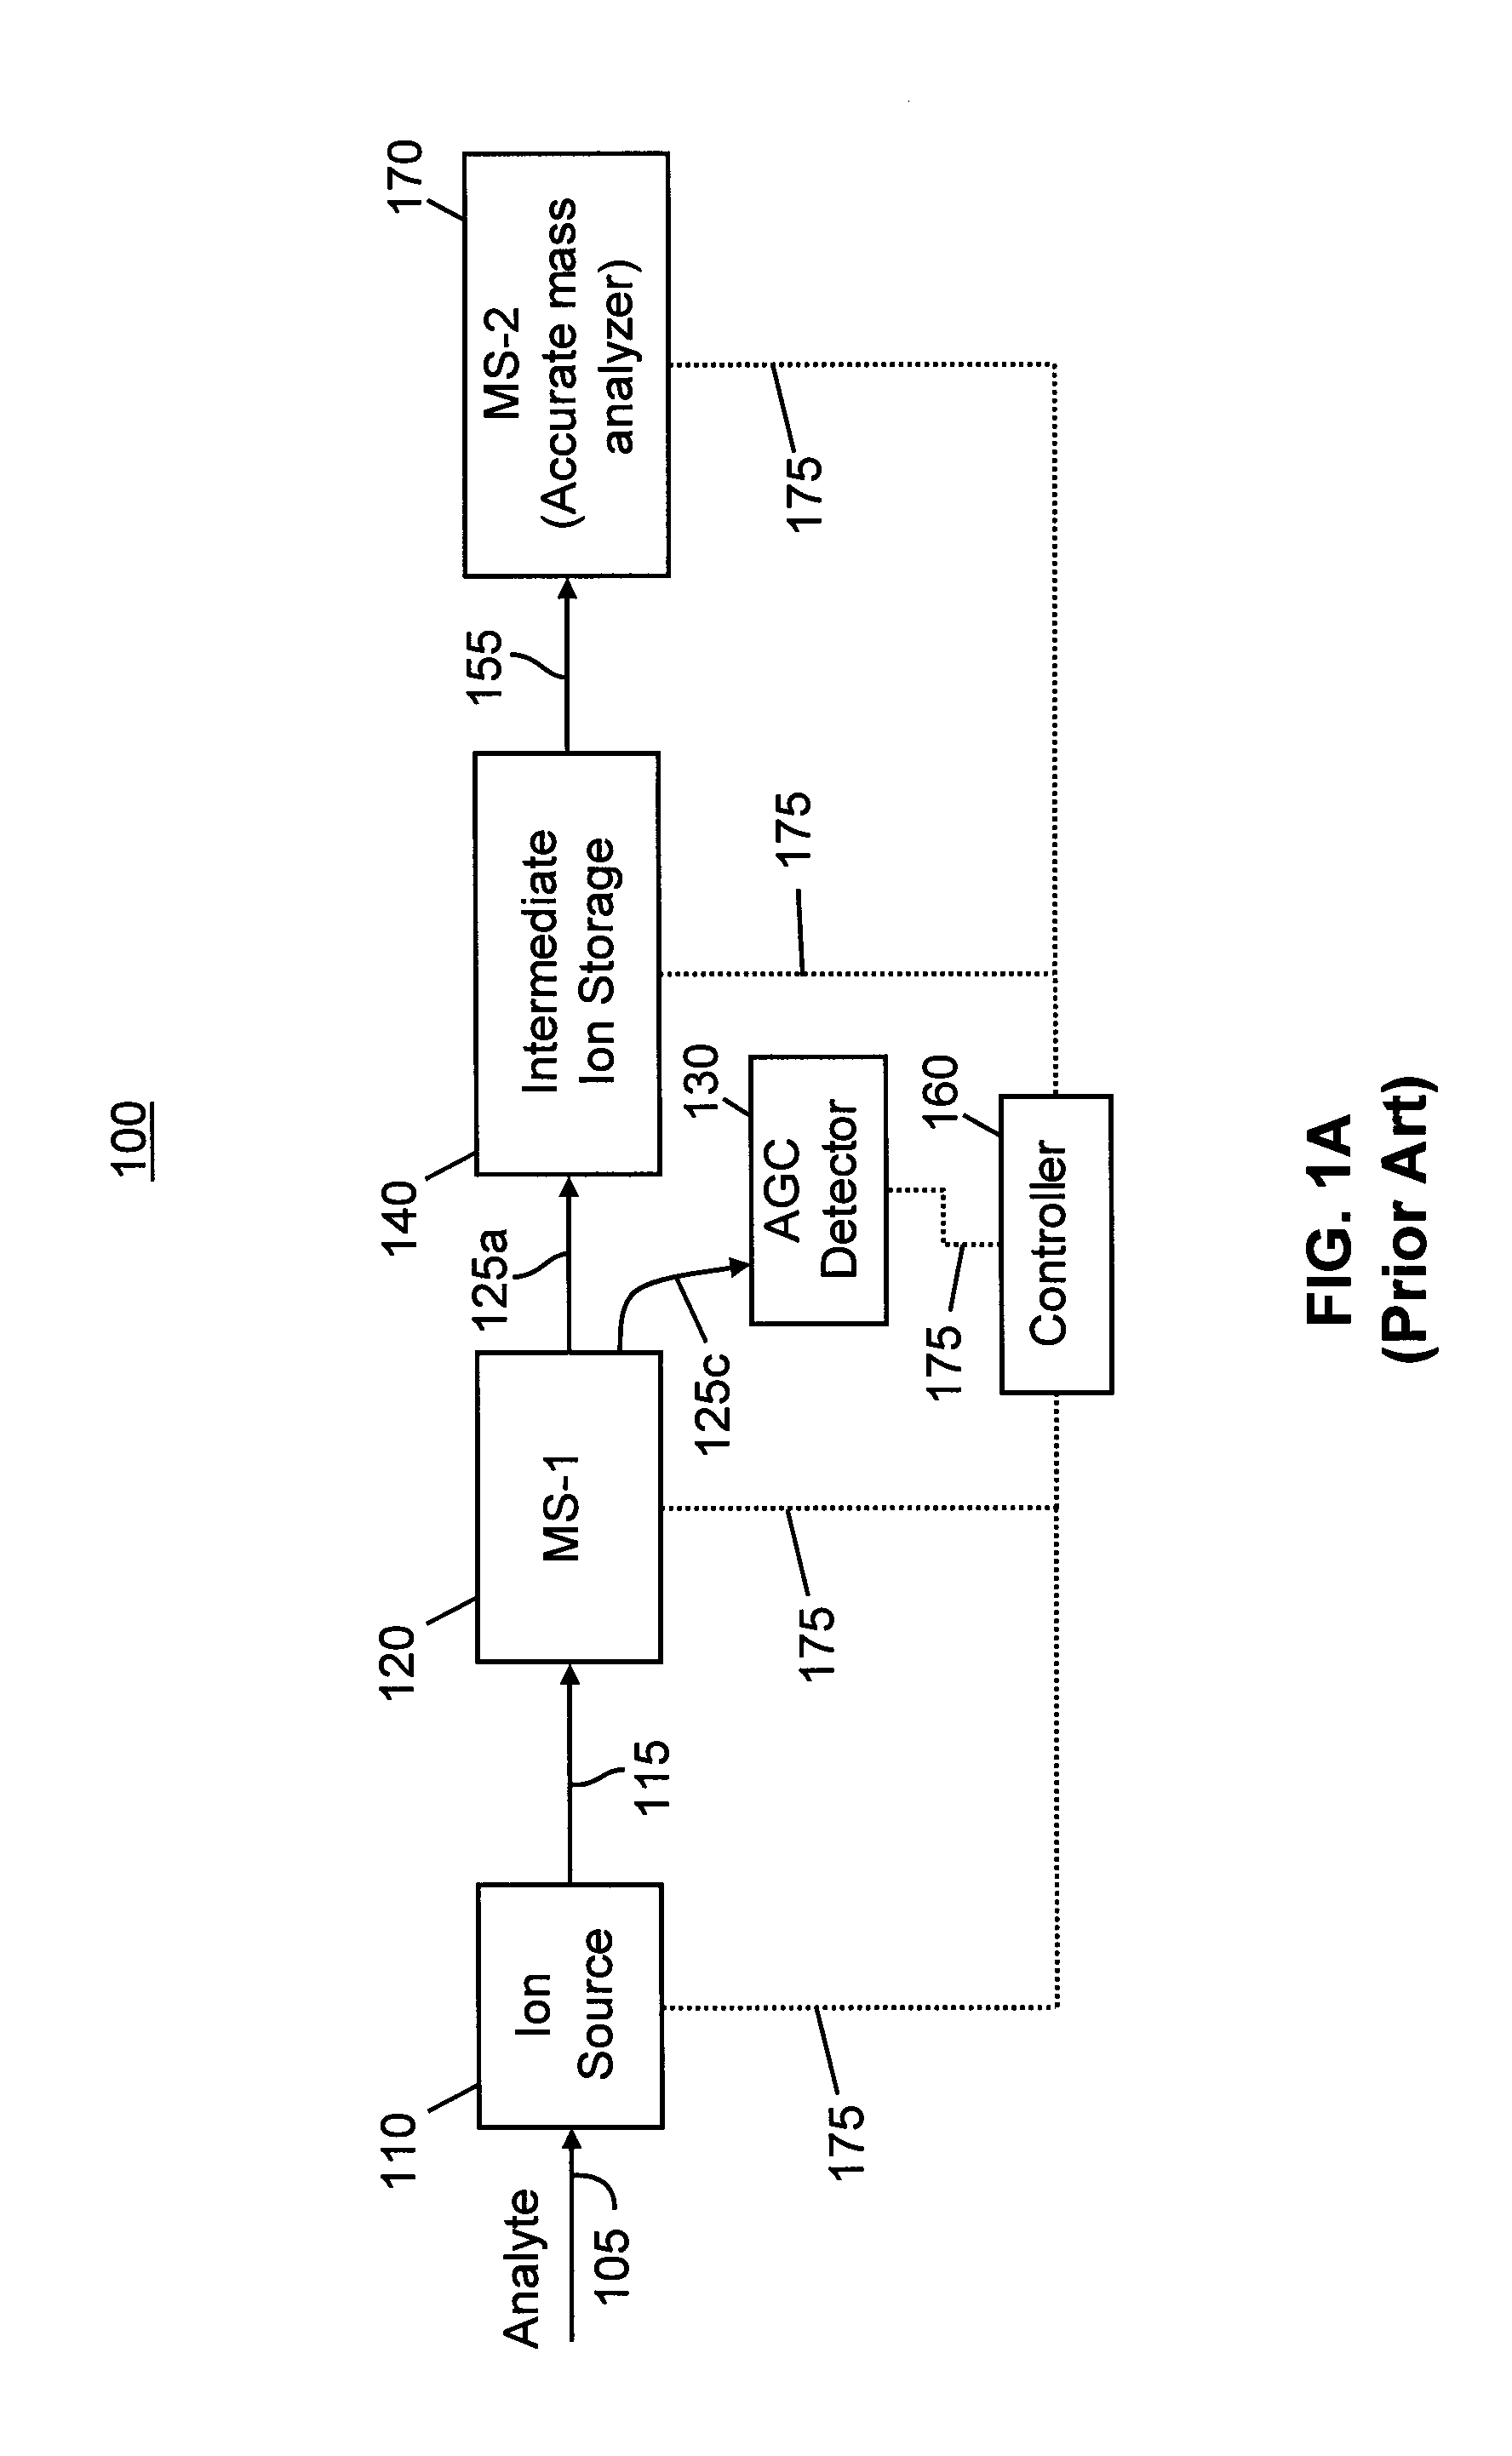 Methods and systems for matching product ions to precursor in tandem mass spectrometry